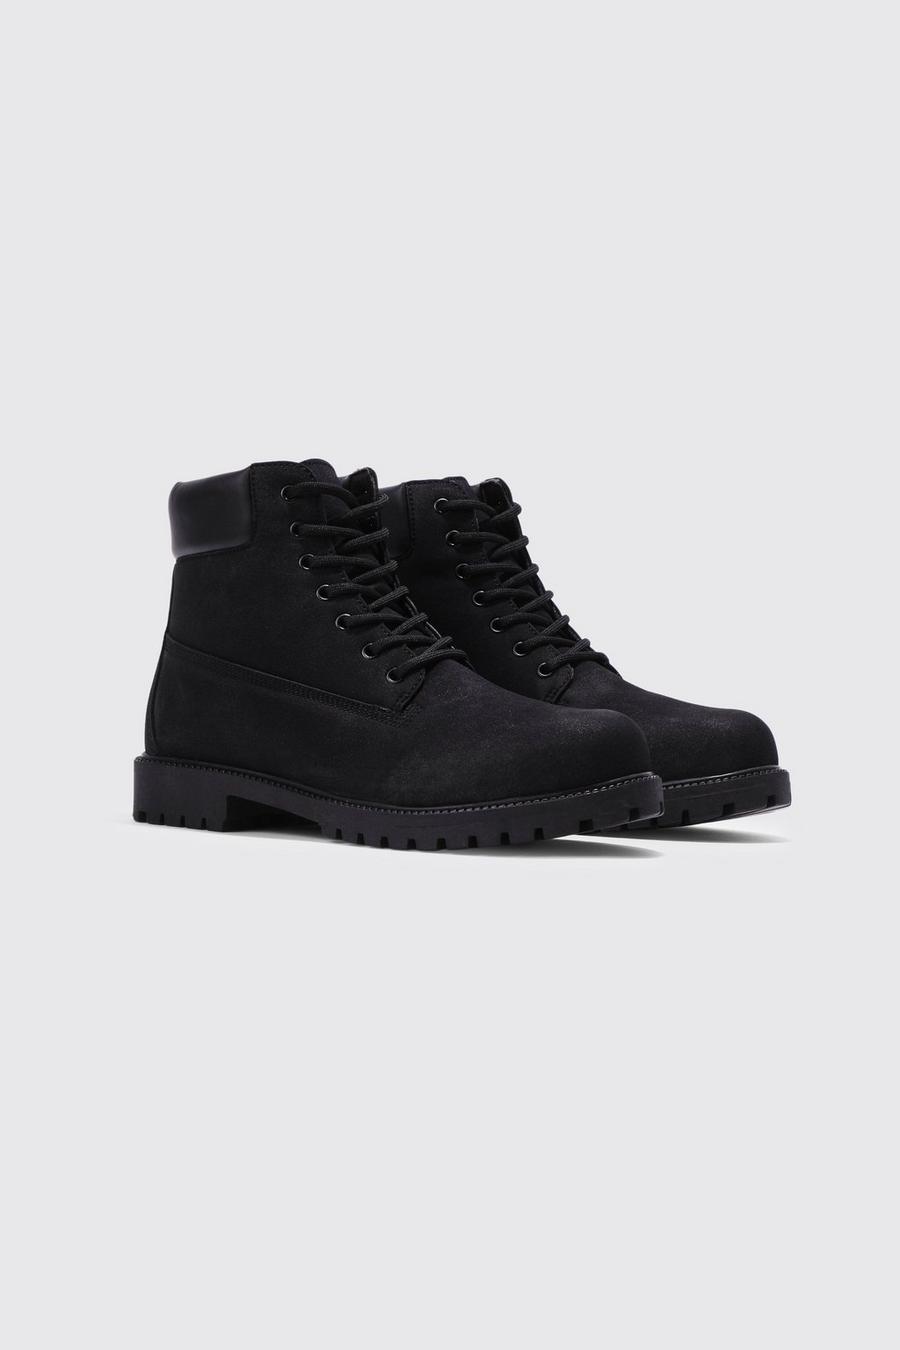 Black Worker Boots